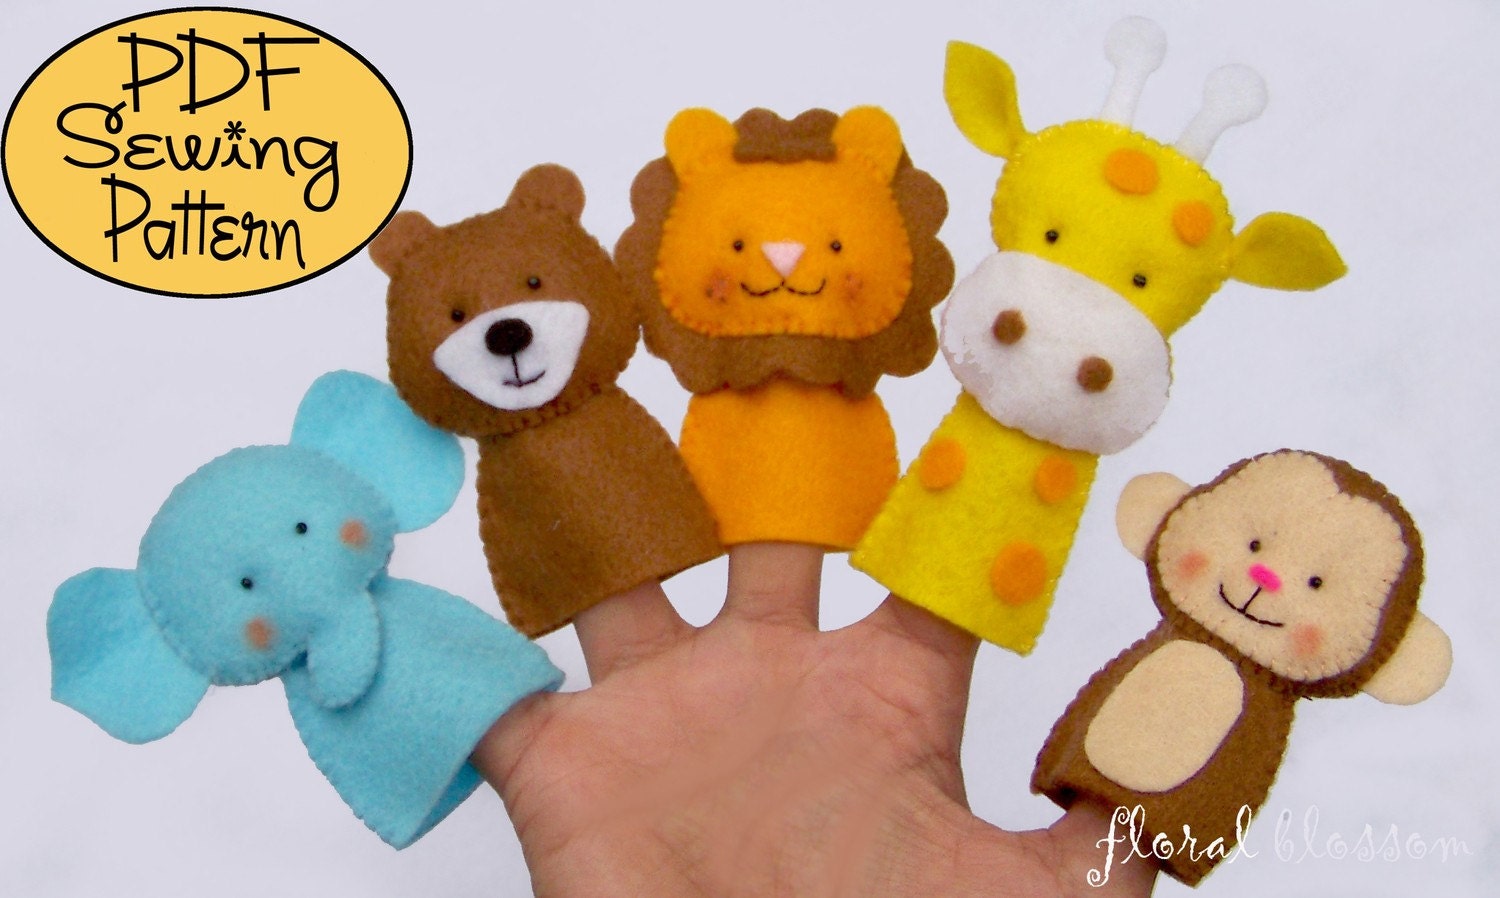 Video: Sewing the Pattern Outline: How to Make a Puppet | eHow.com